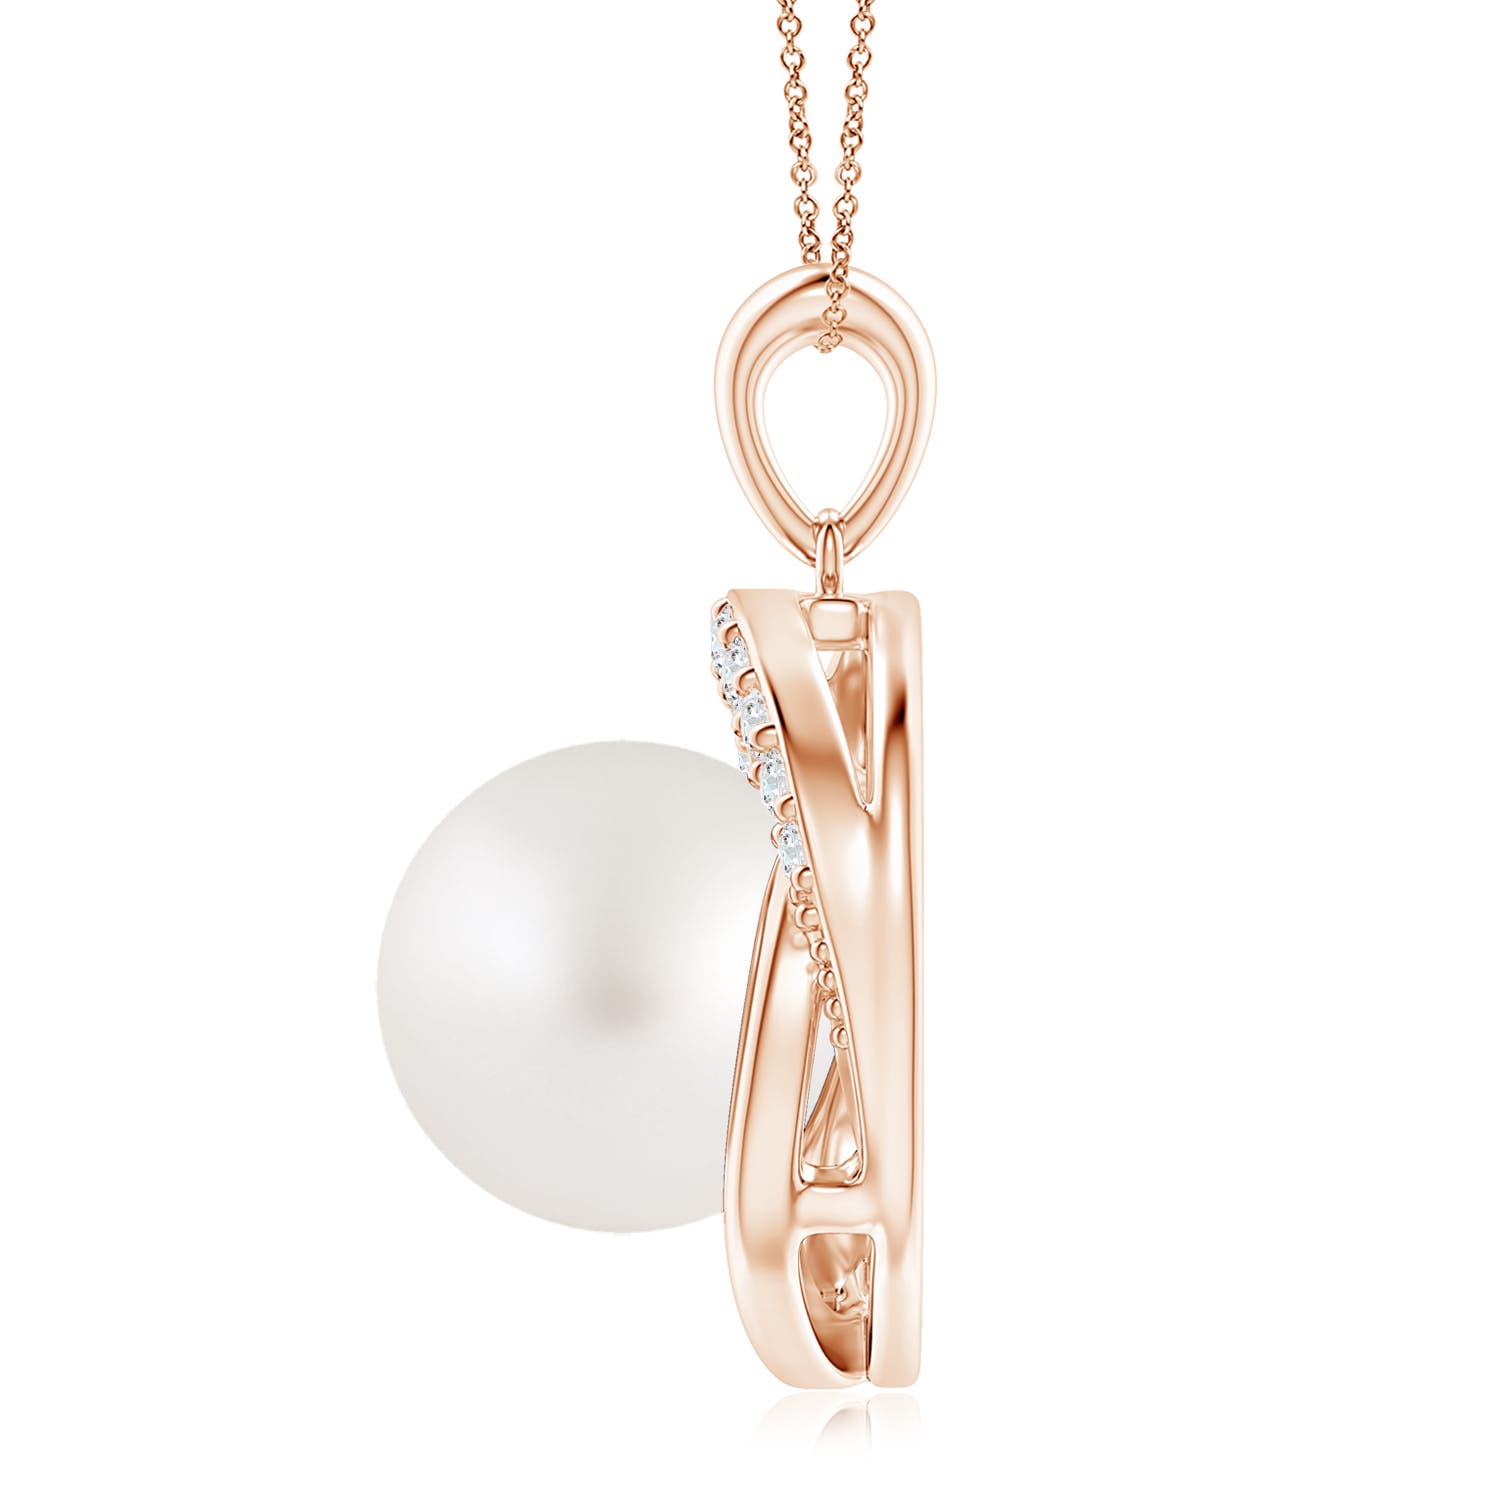 AA - South Sea Cultured Pearl / 9.76 CT / 14 KT Rose Gold